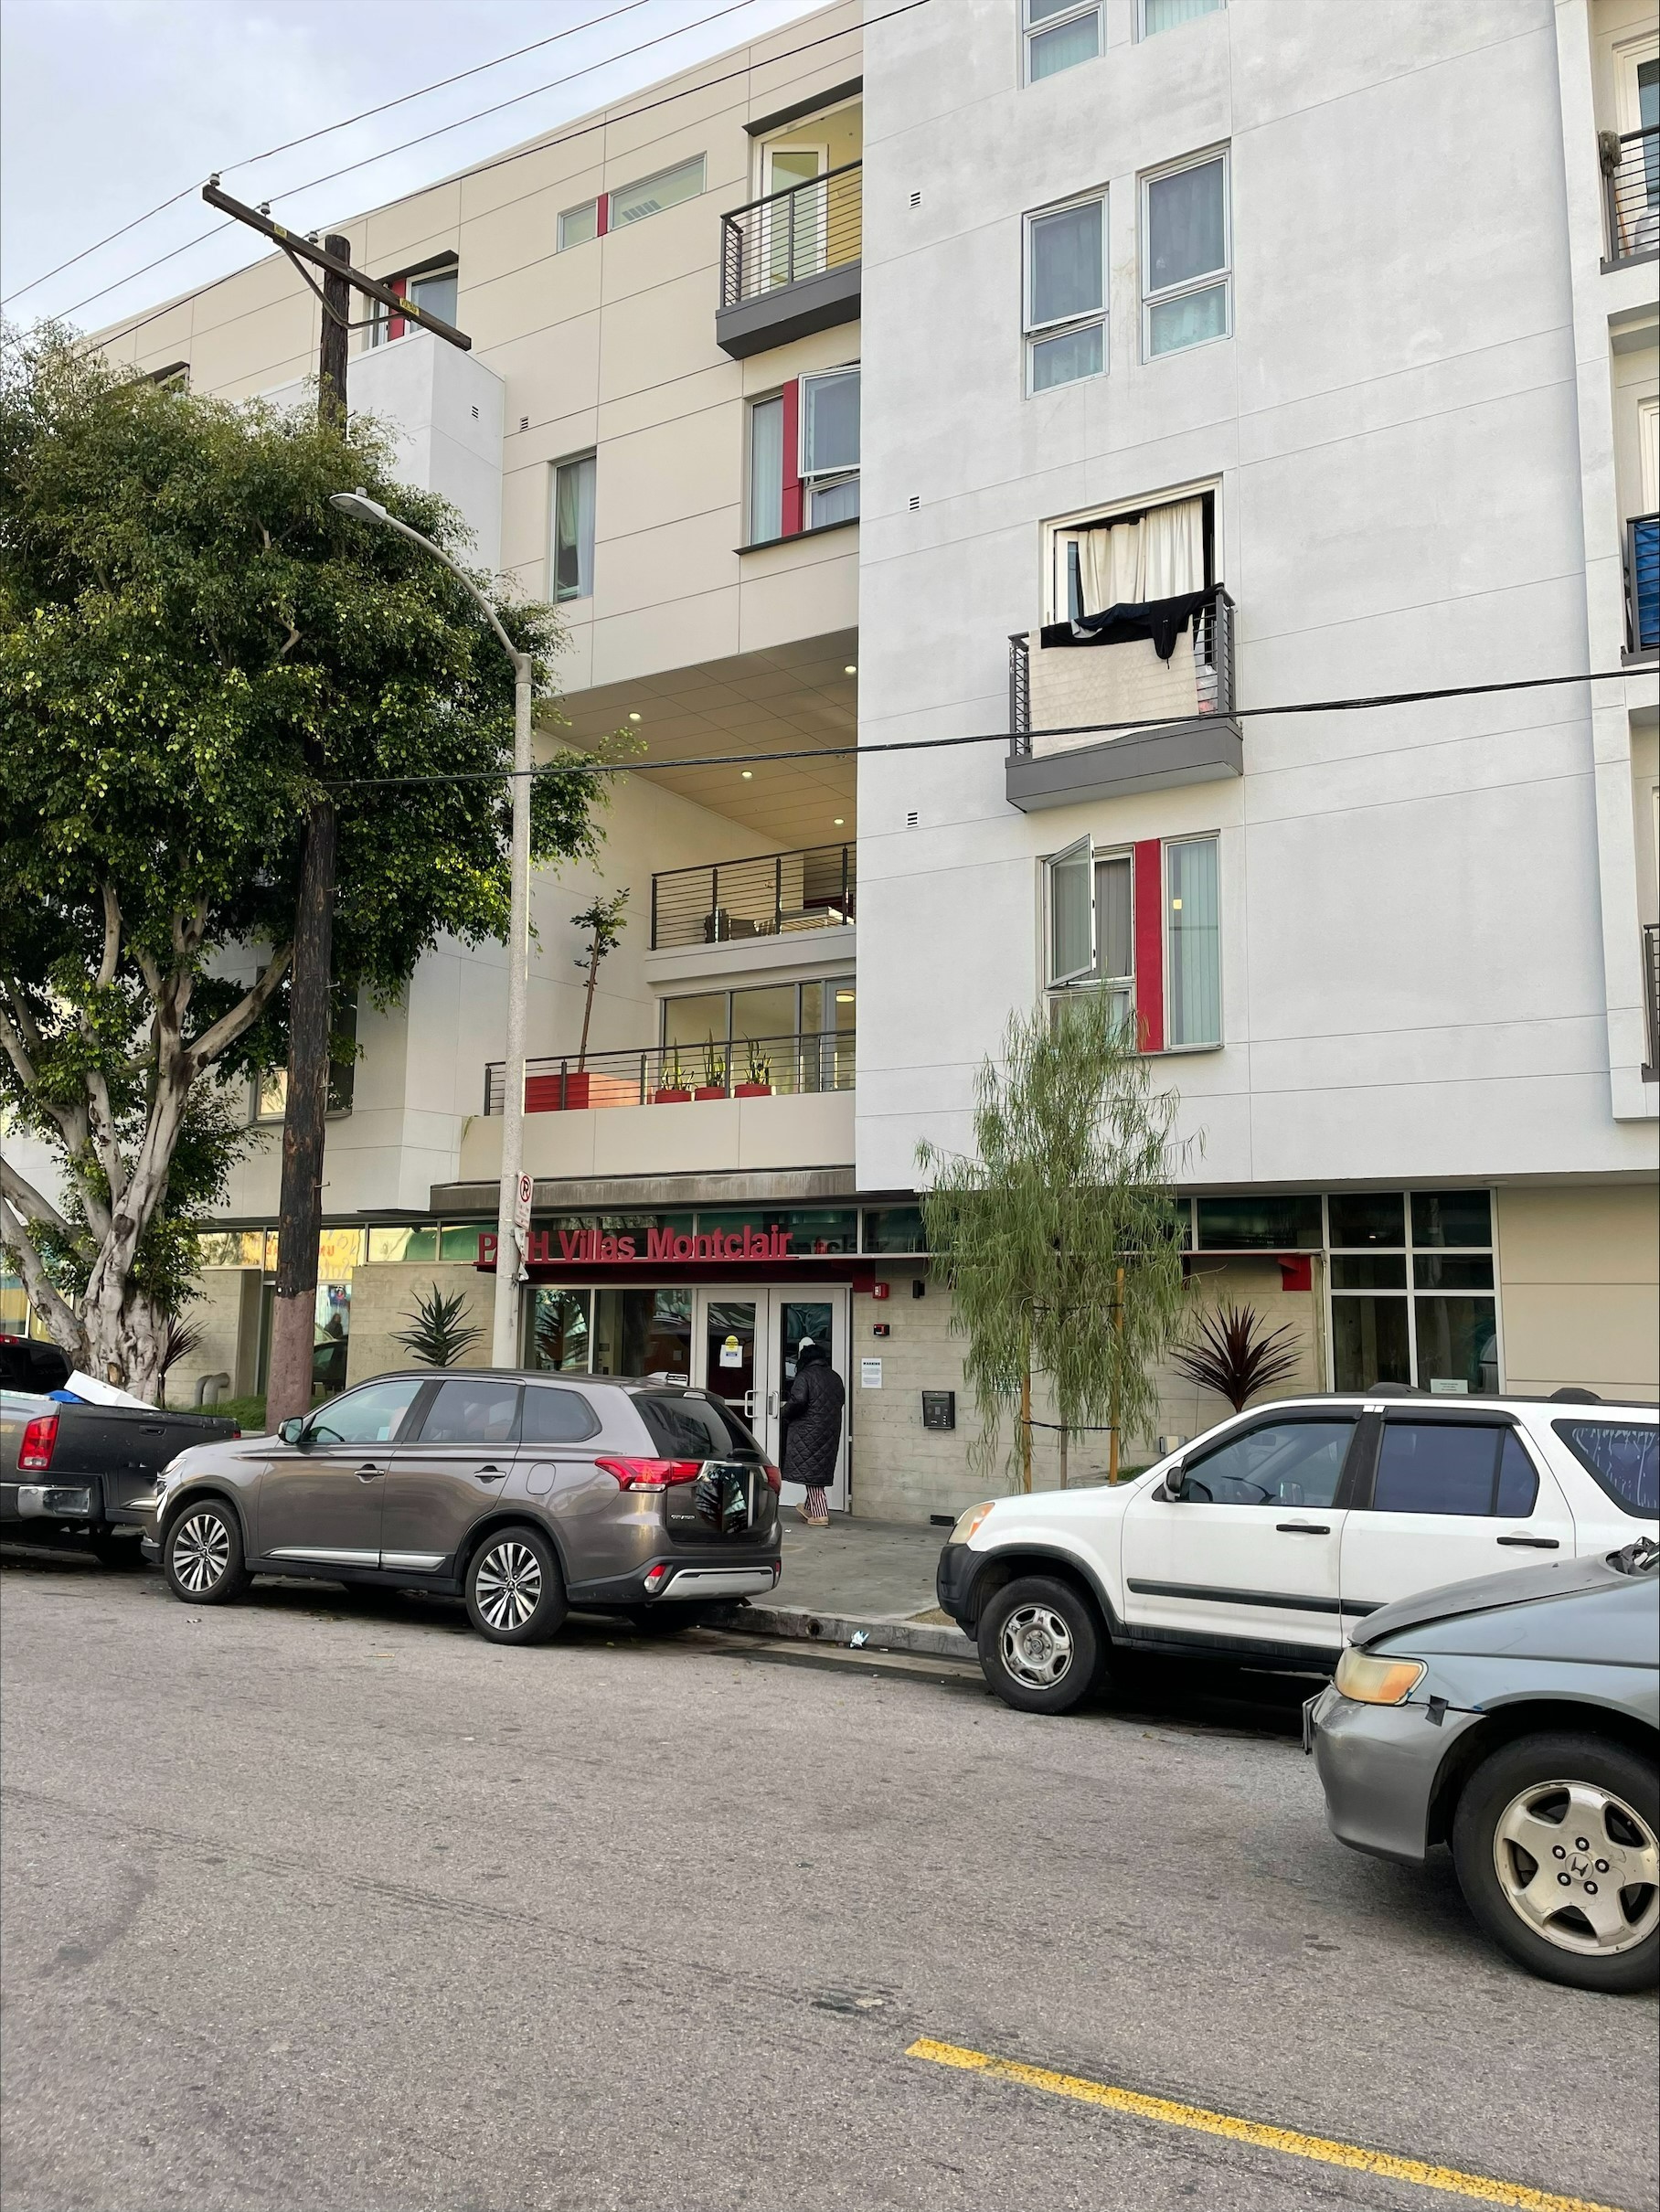 Street view of building. Cars parked in front of building. Balconies can be seen above the buildings entrance. Two trees on the sidewalk.